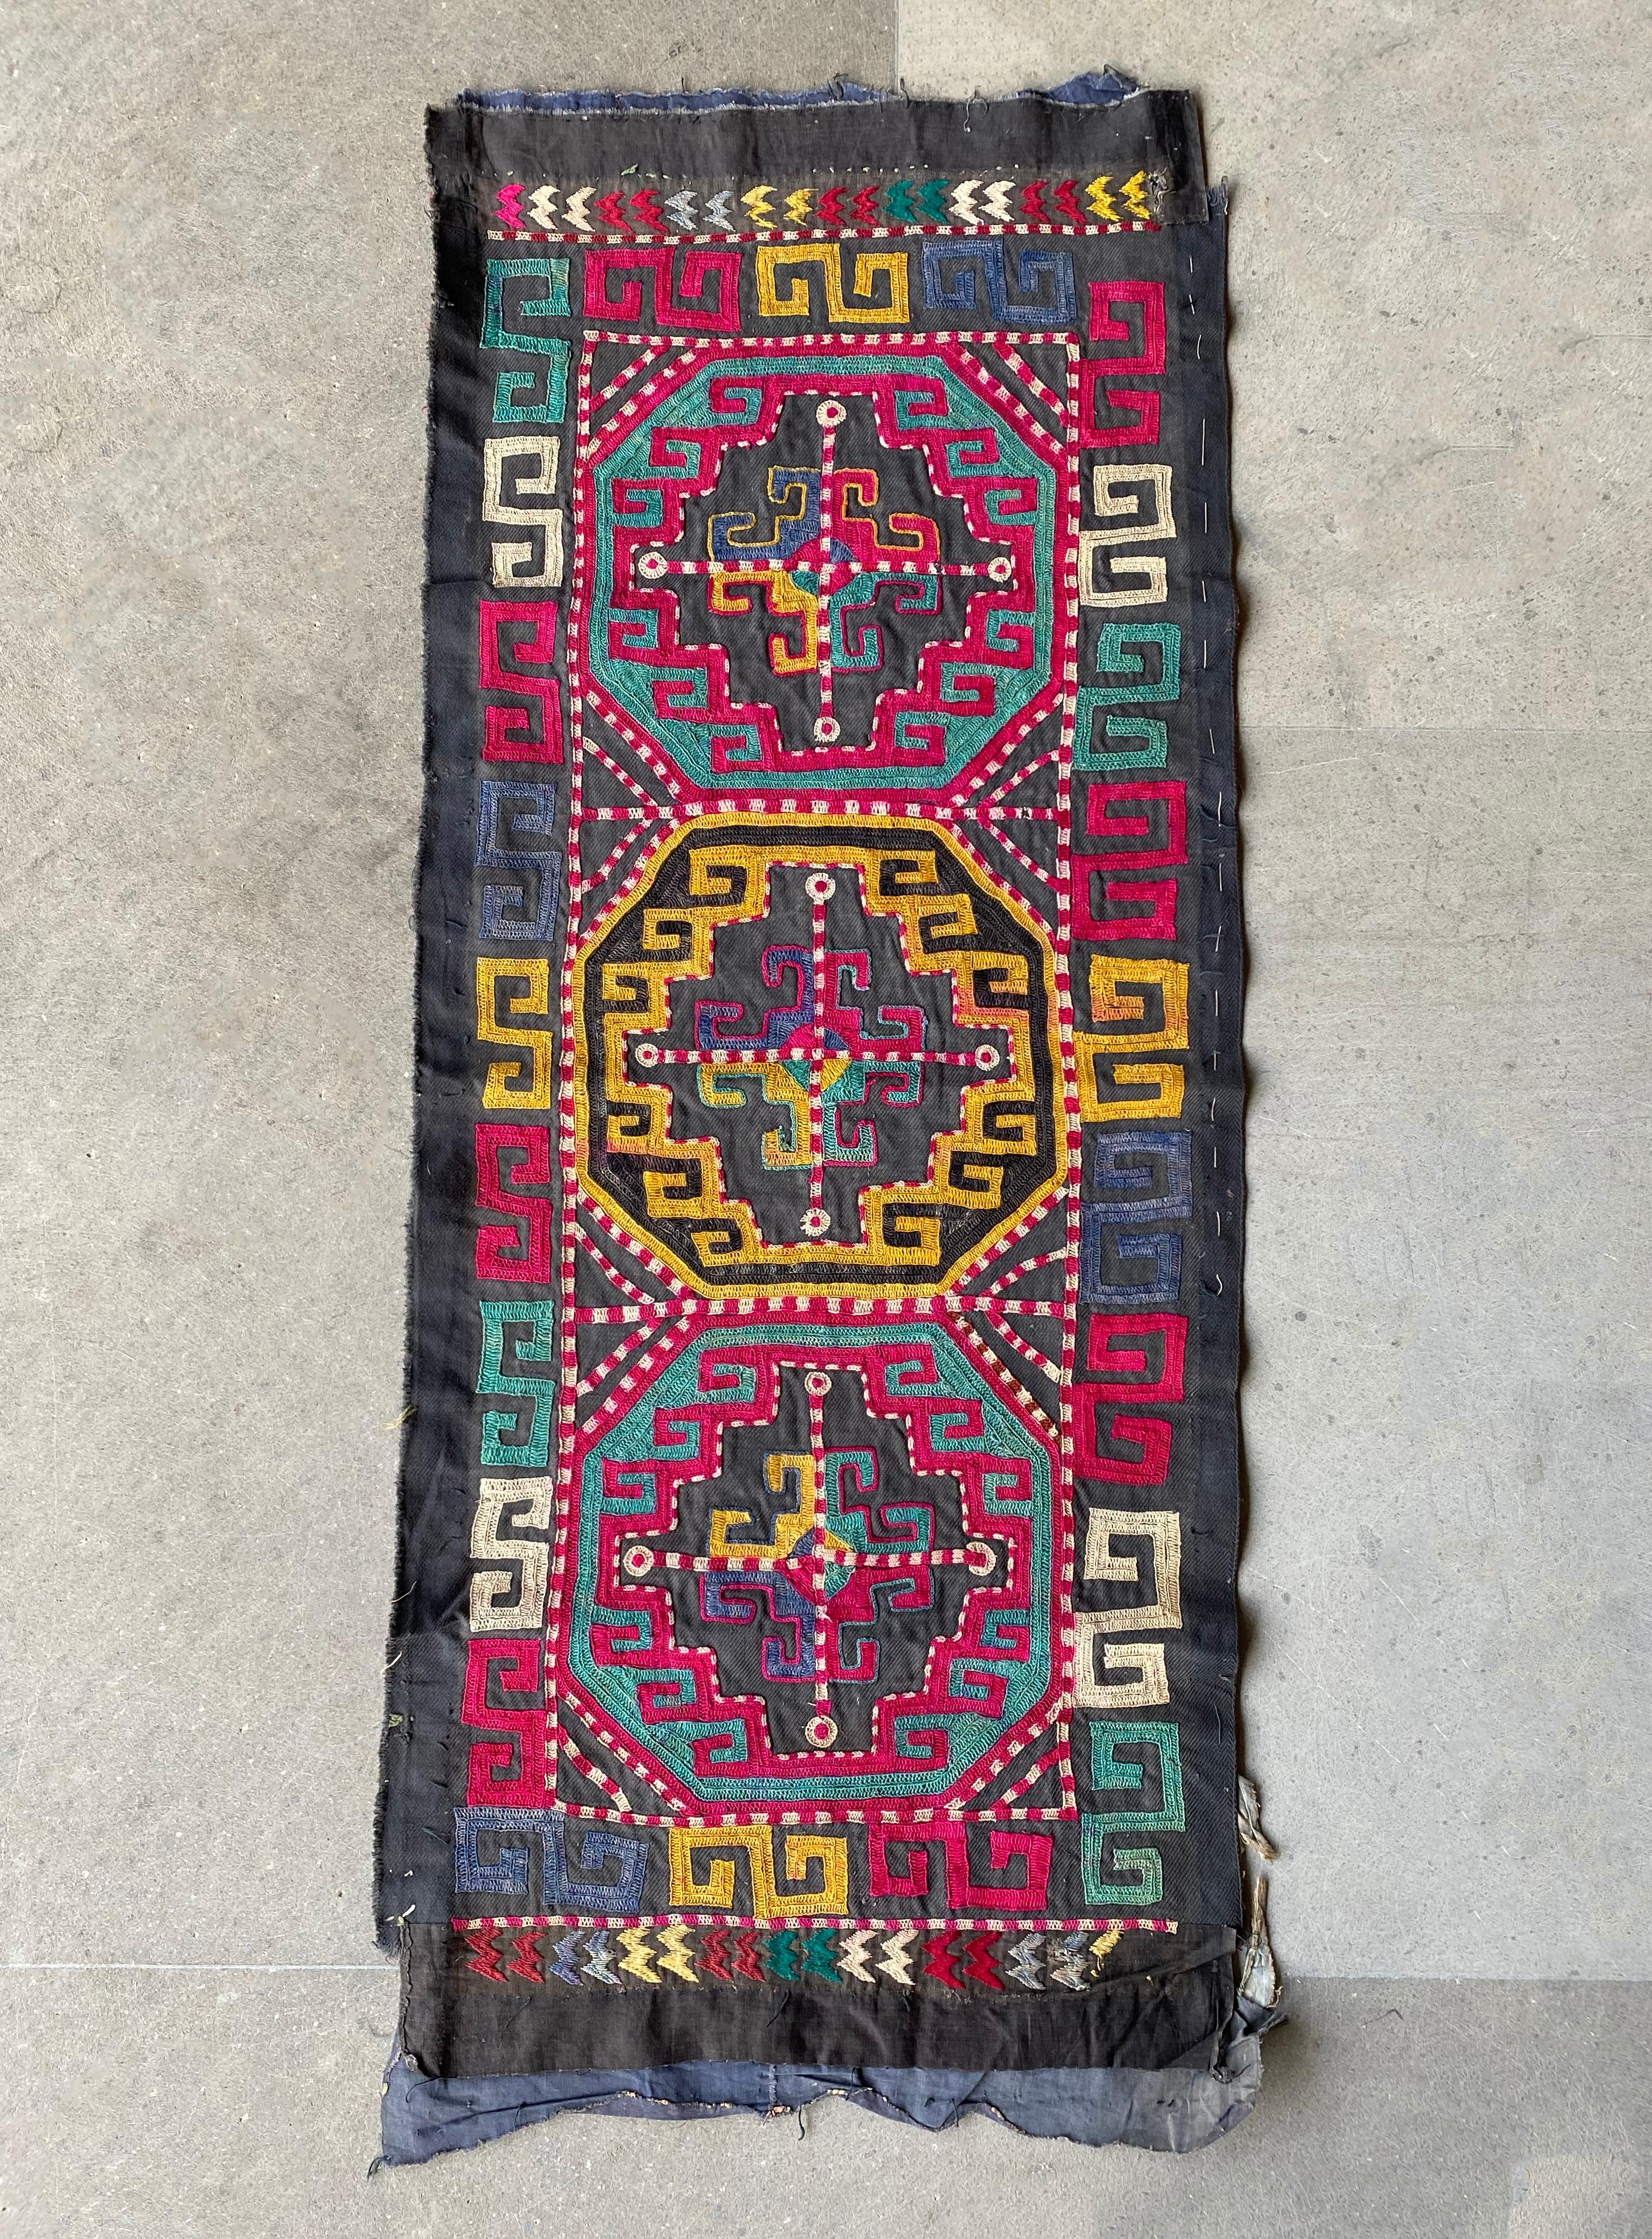 This textile is a “Suzani” from Central Asian nomadic peoples primarily from Kazakhstan, Tajikistan and Uzbekistan. Suzanis are embroidered textiles composed of mainly cotton. They are cherished and admired for their elaborate designs, motifs and